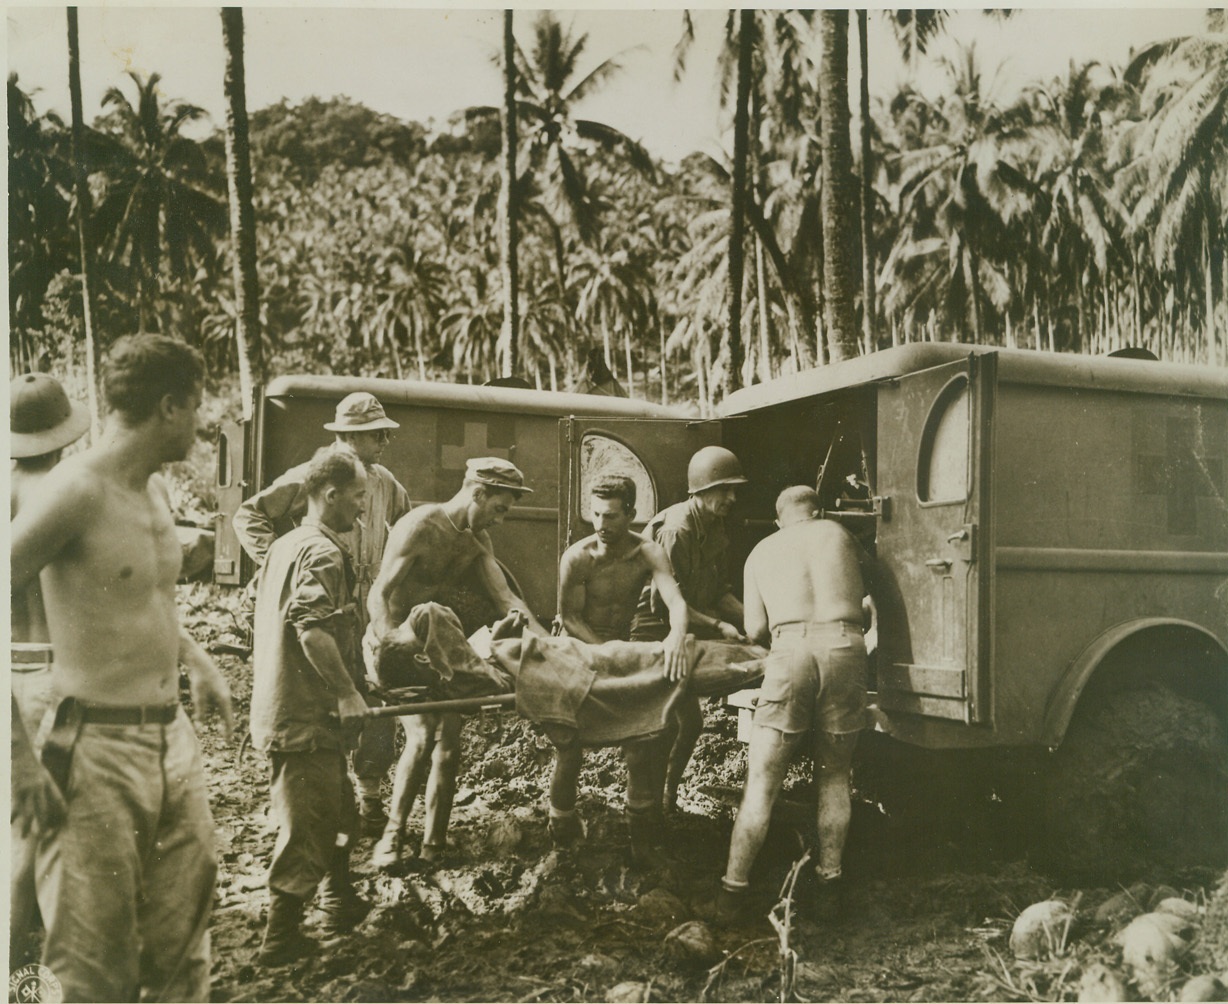 Removing New Georgia Wounded, 9/21/1943. NEW GEORGIA ISLAND – Allied wounded are placed in ambulances for removal from the fighting zone on New Georgia Island. Note mud-caked wheel of ambulance in foreground. The Japs have been driven from Munda Point on New Georgia after bloody fighting and only isolated pockets of resistance remain. Credit: U.S. Signal Corps photo from ACME;